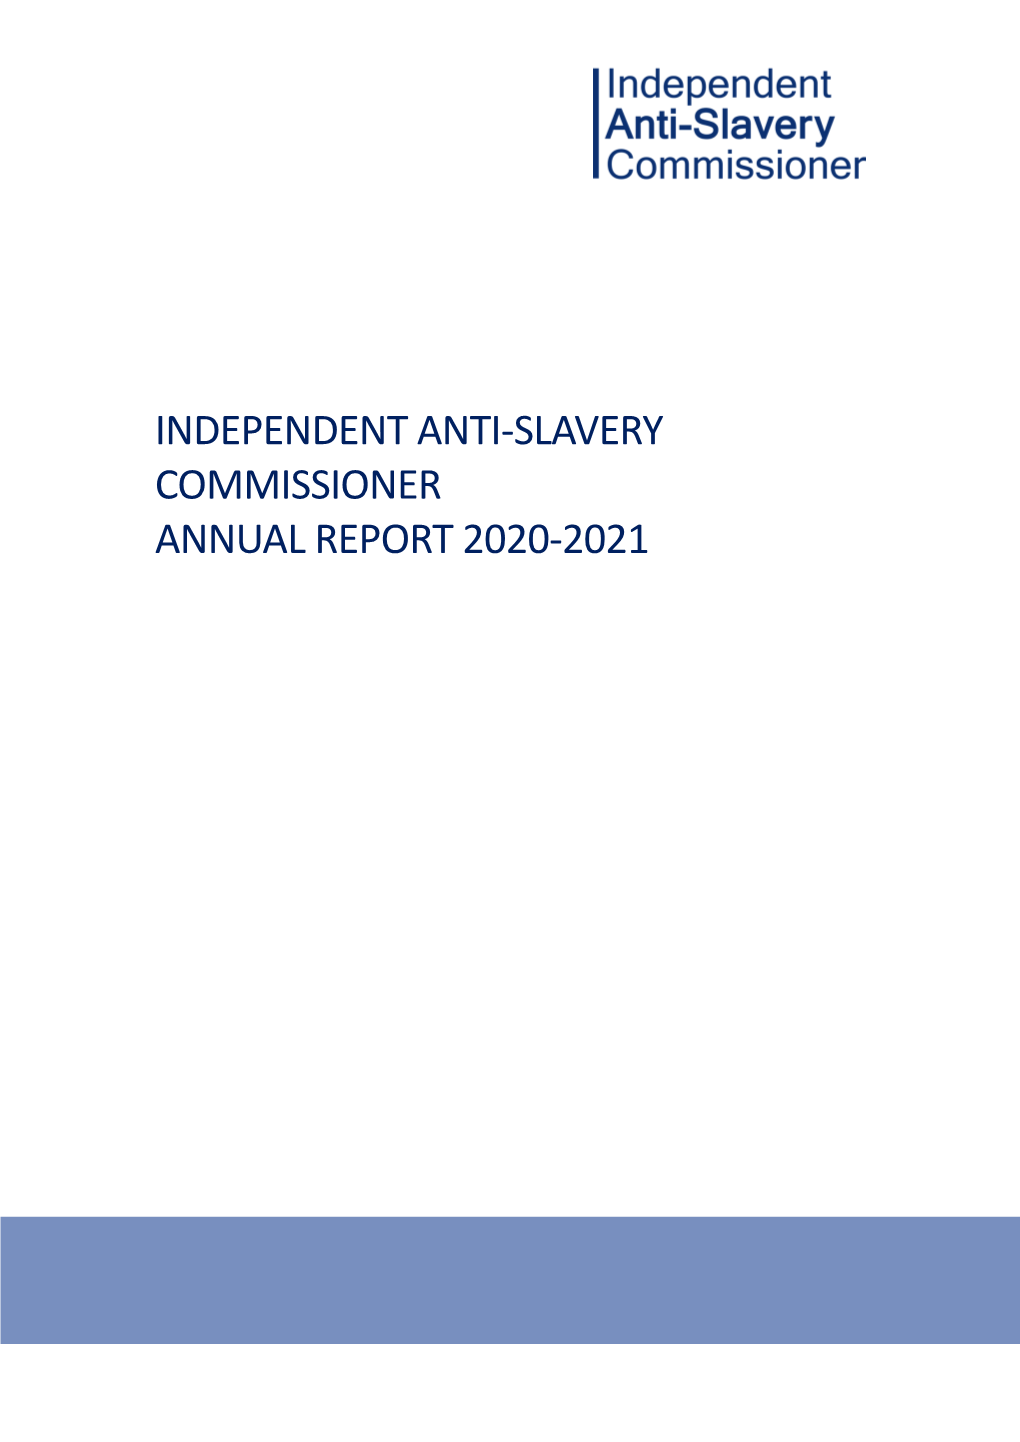 Independent Anti-Slavery Commissioner Annual Report 2020-2021